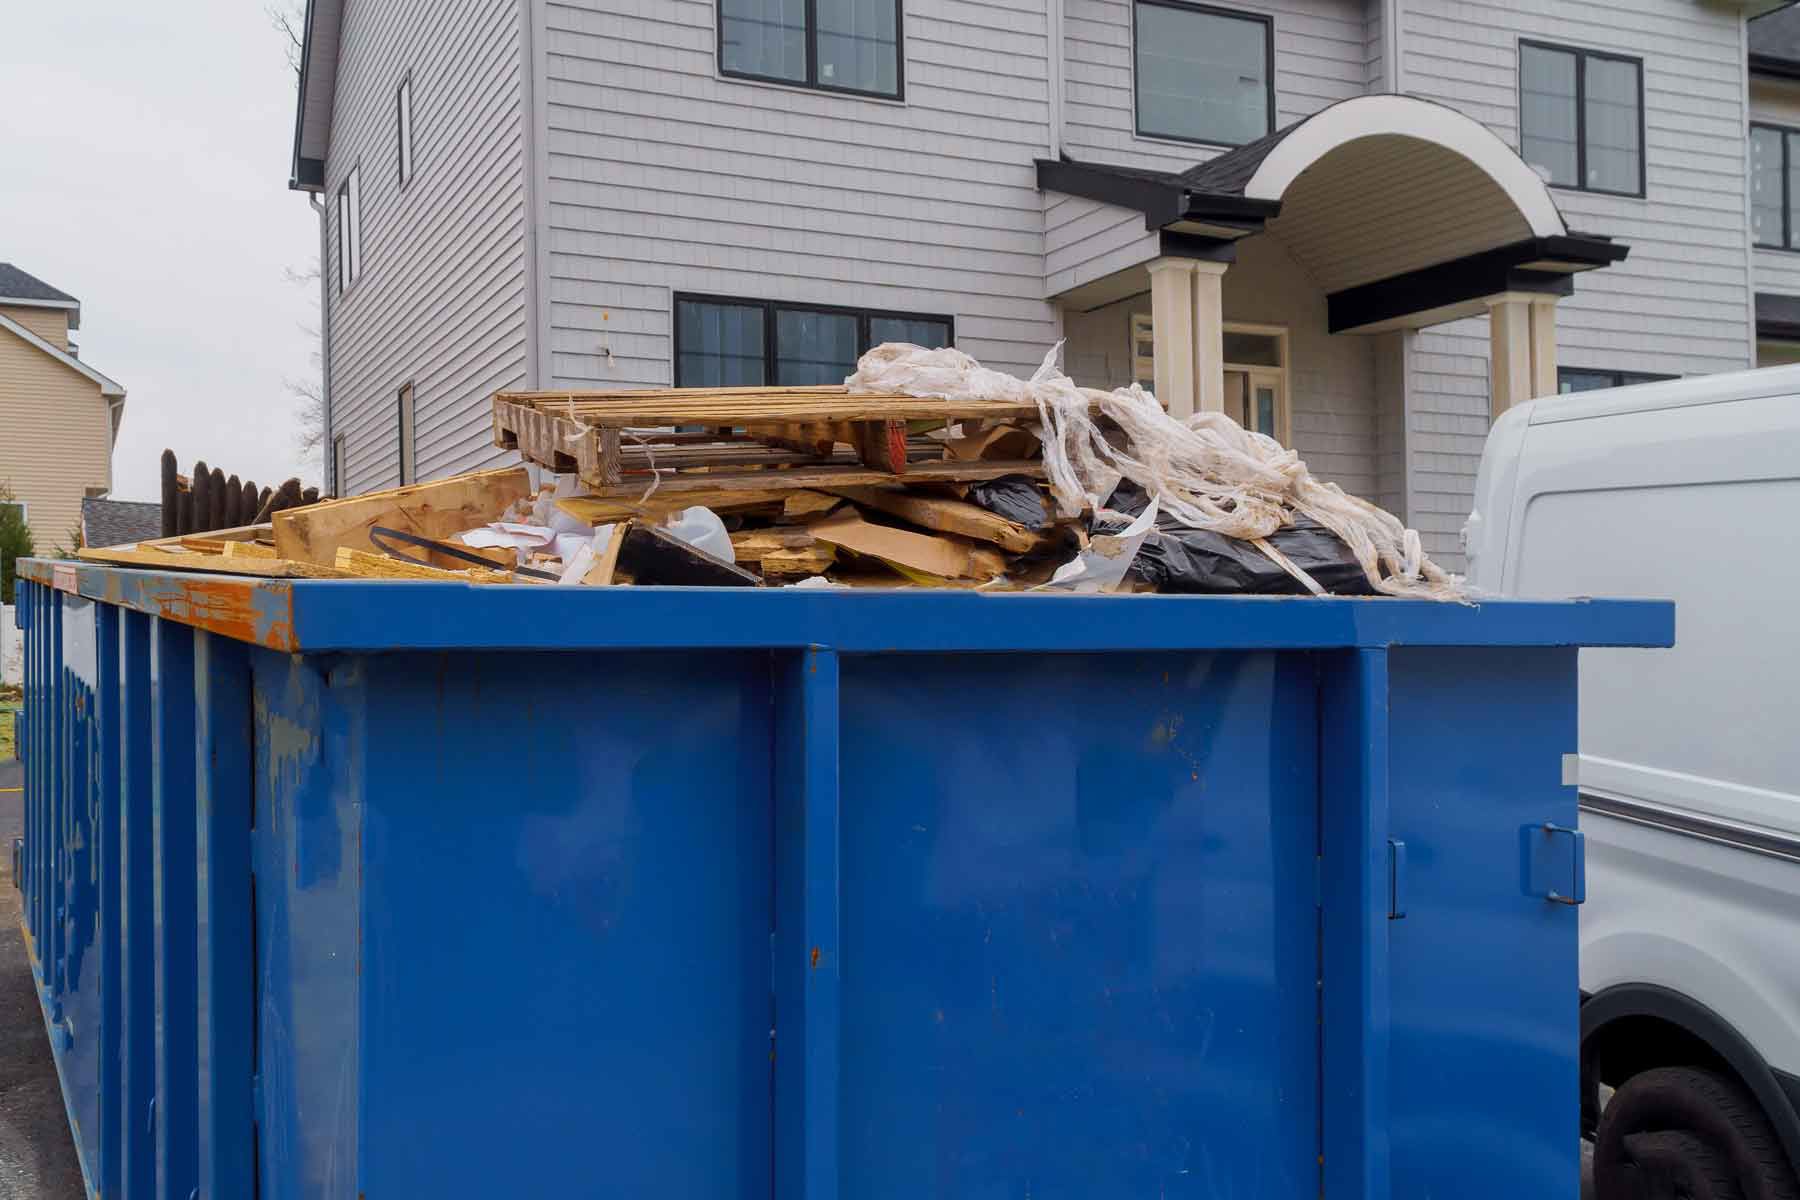 How to Rent a Dumpster in Haledon NJ